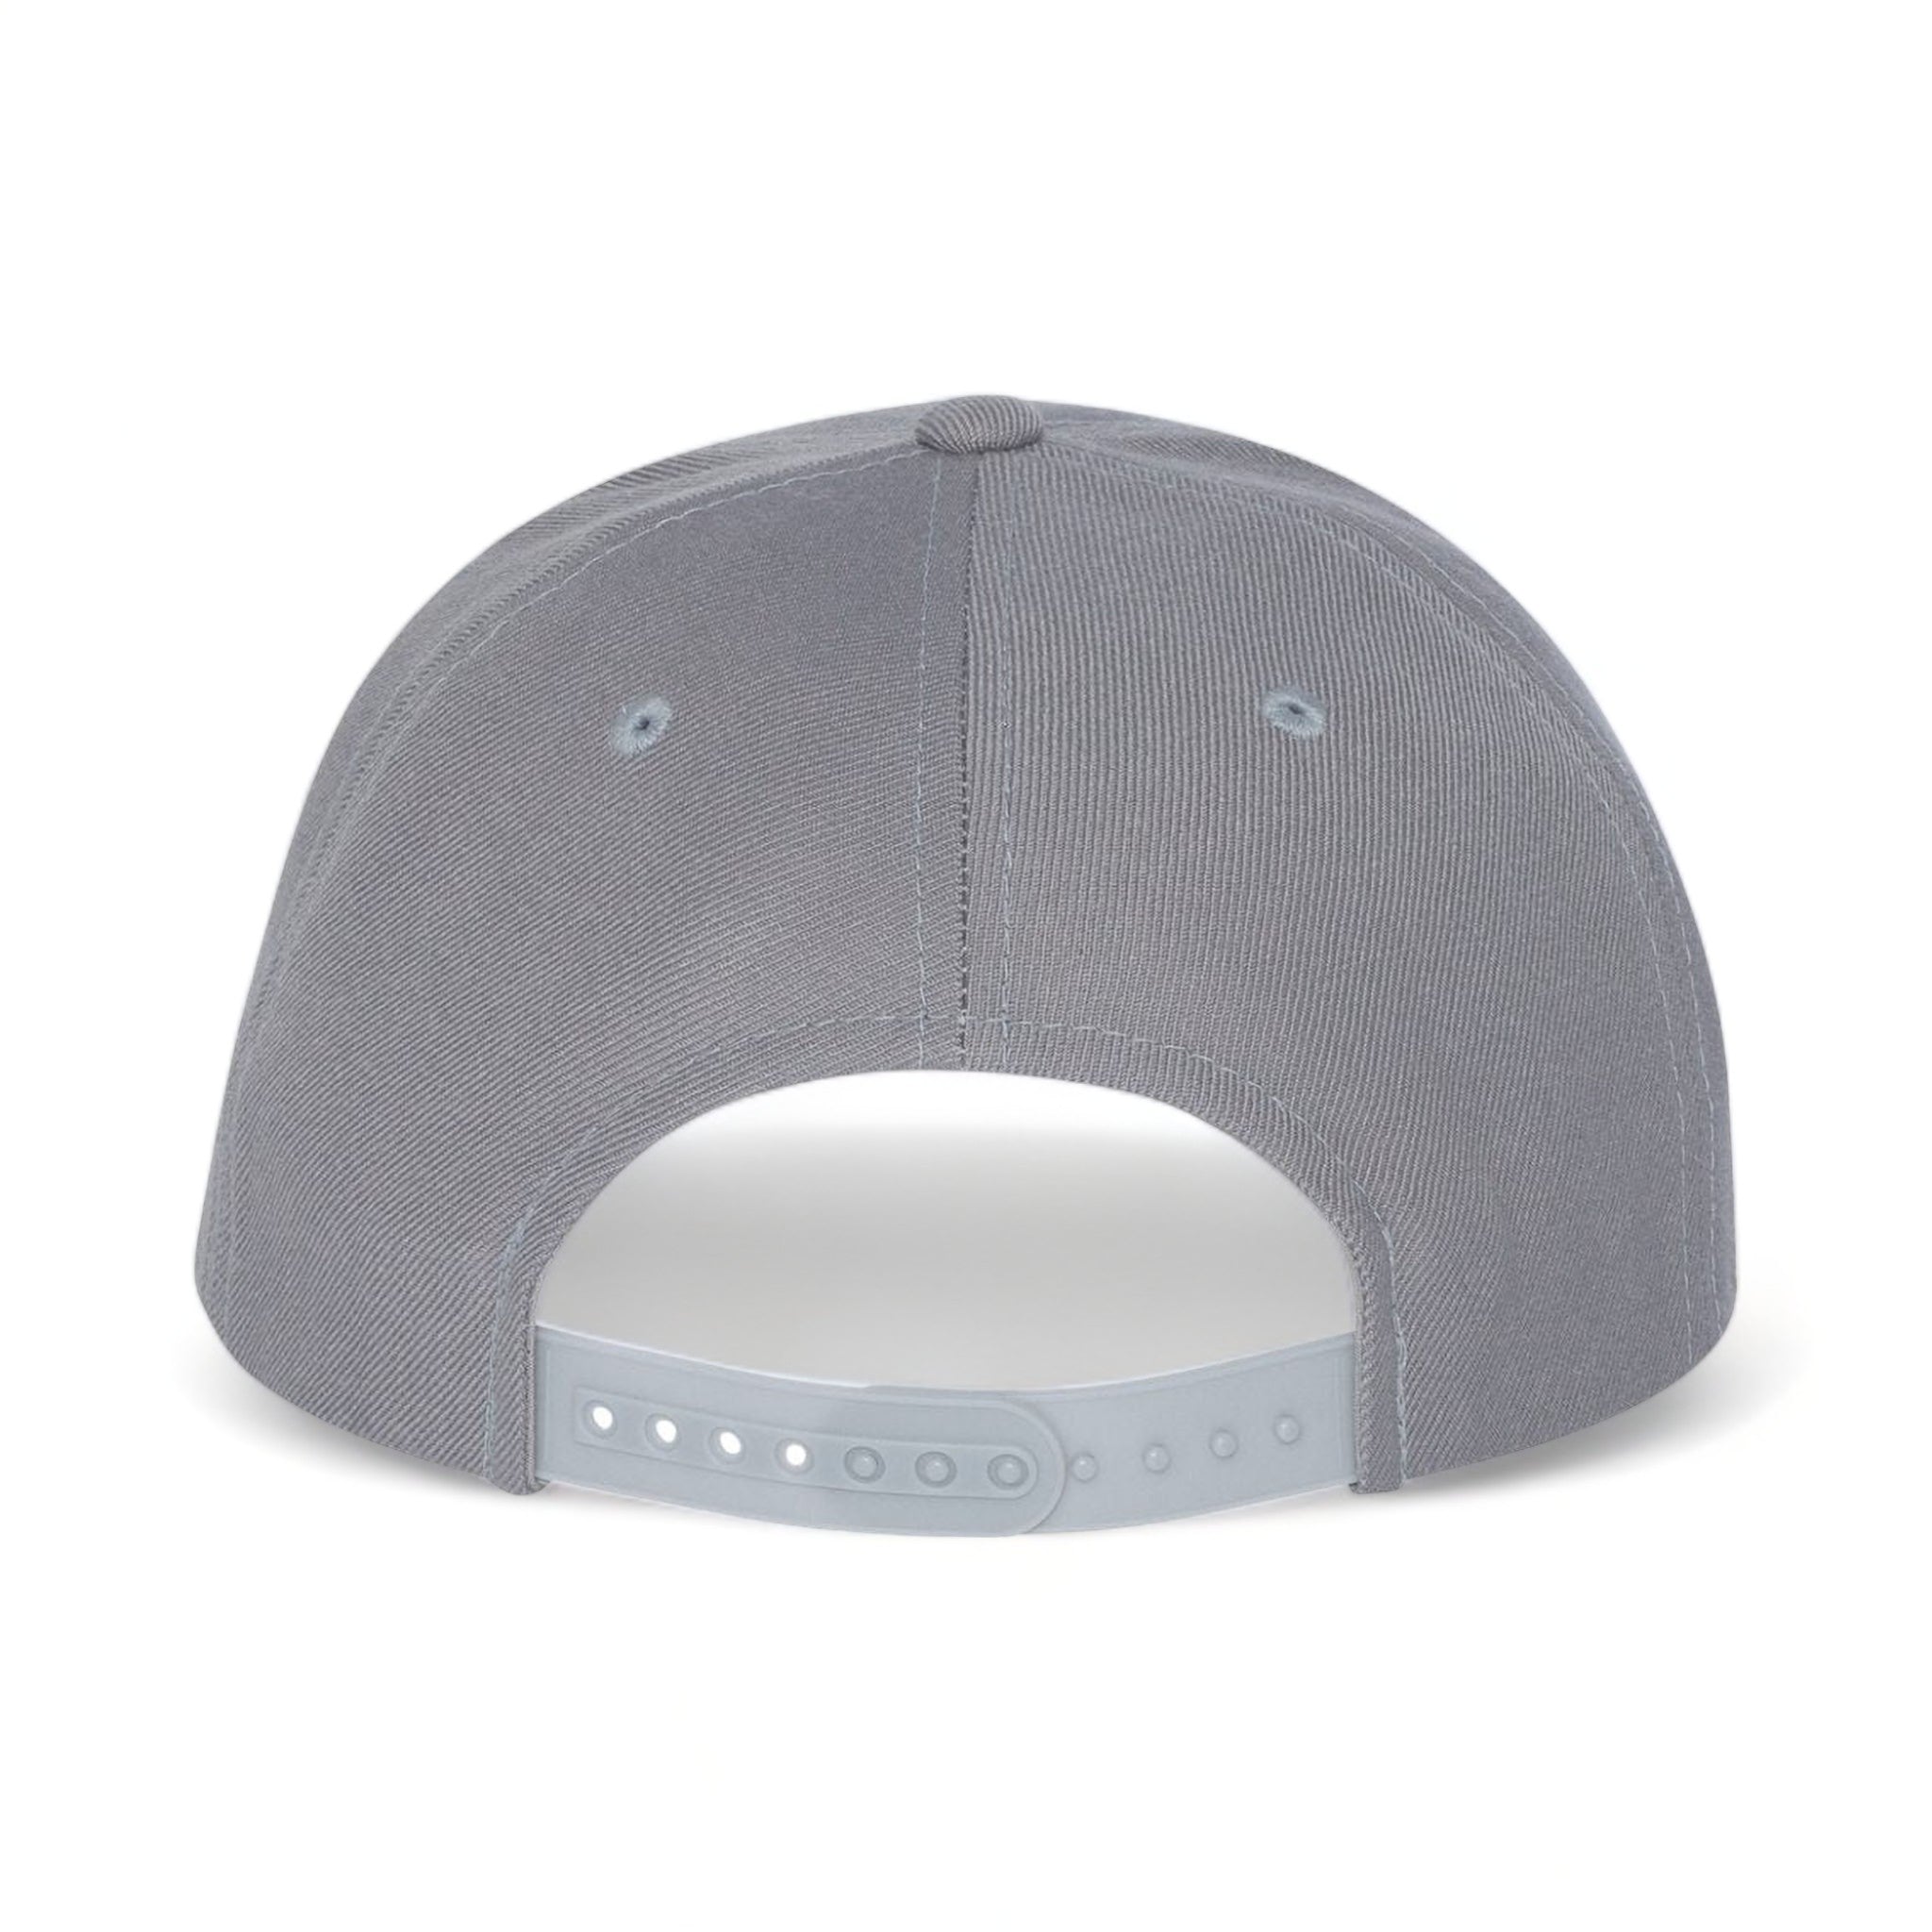 Back view of YP Classics 6089M custom hat in silver